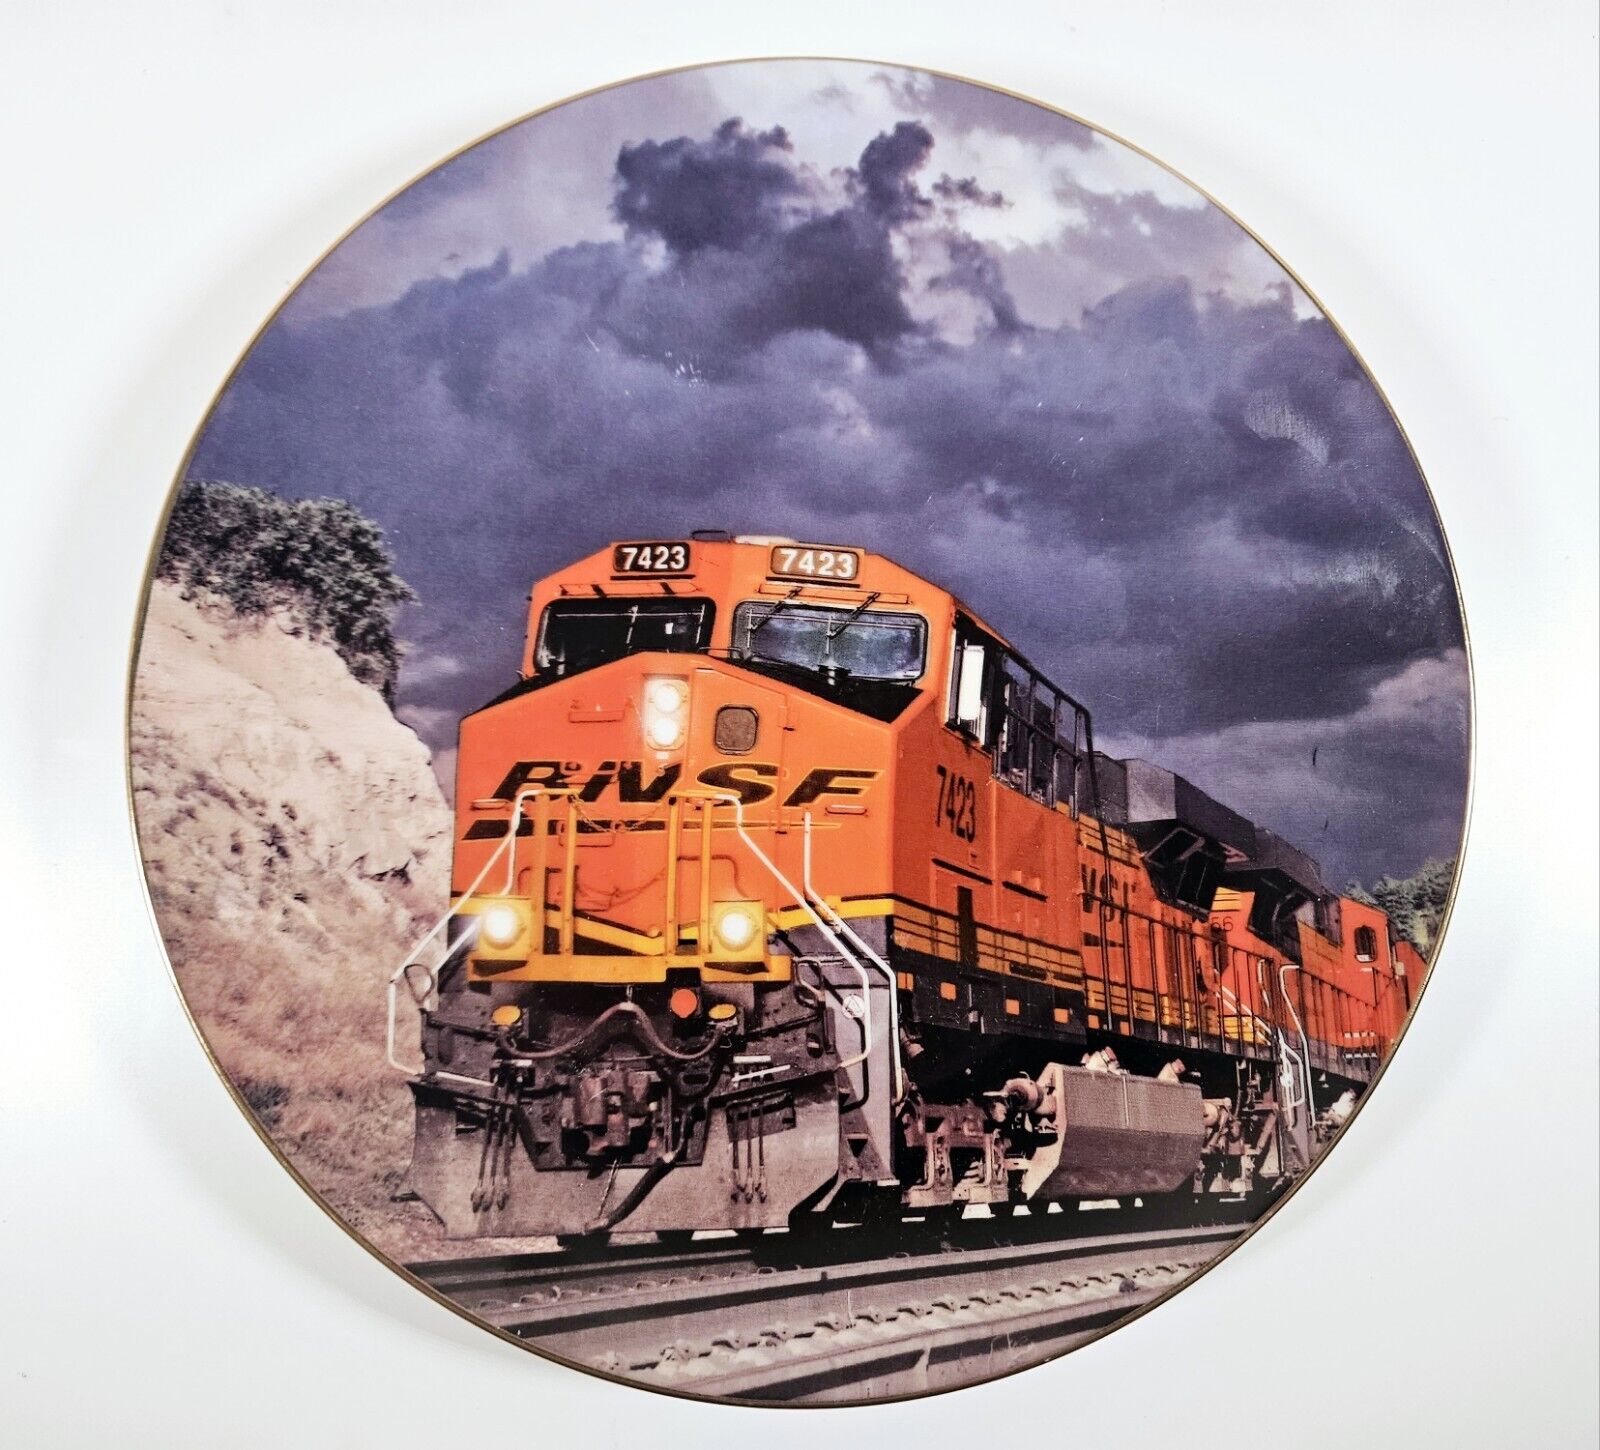 BNSF Railway Collector Plate 2011 Safety Award STORMY SKIES #2,725 of 45000